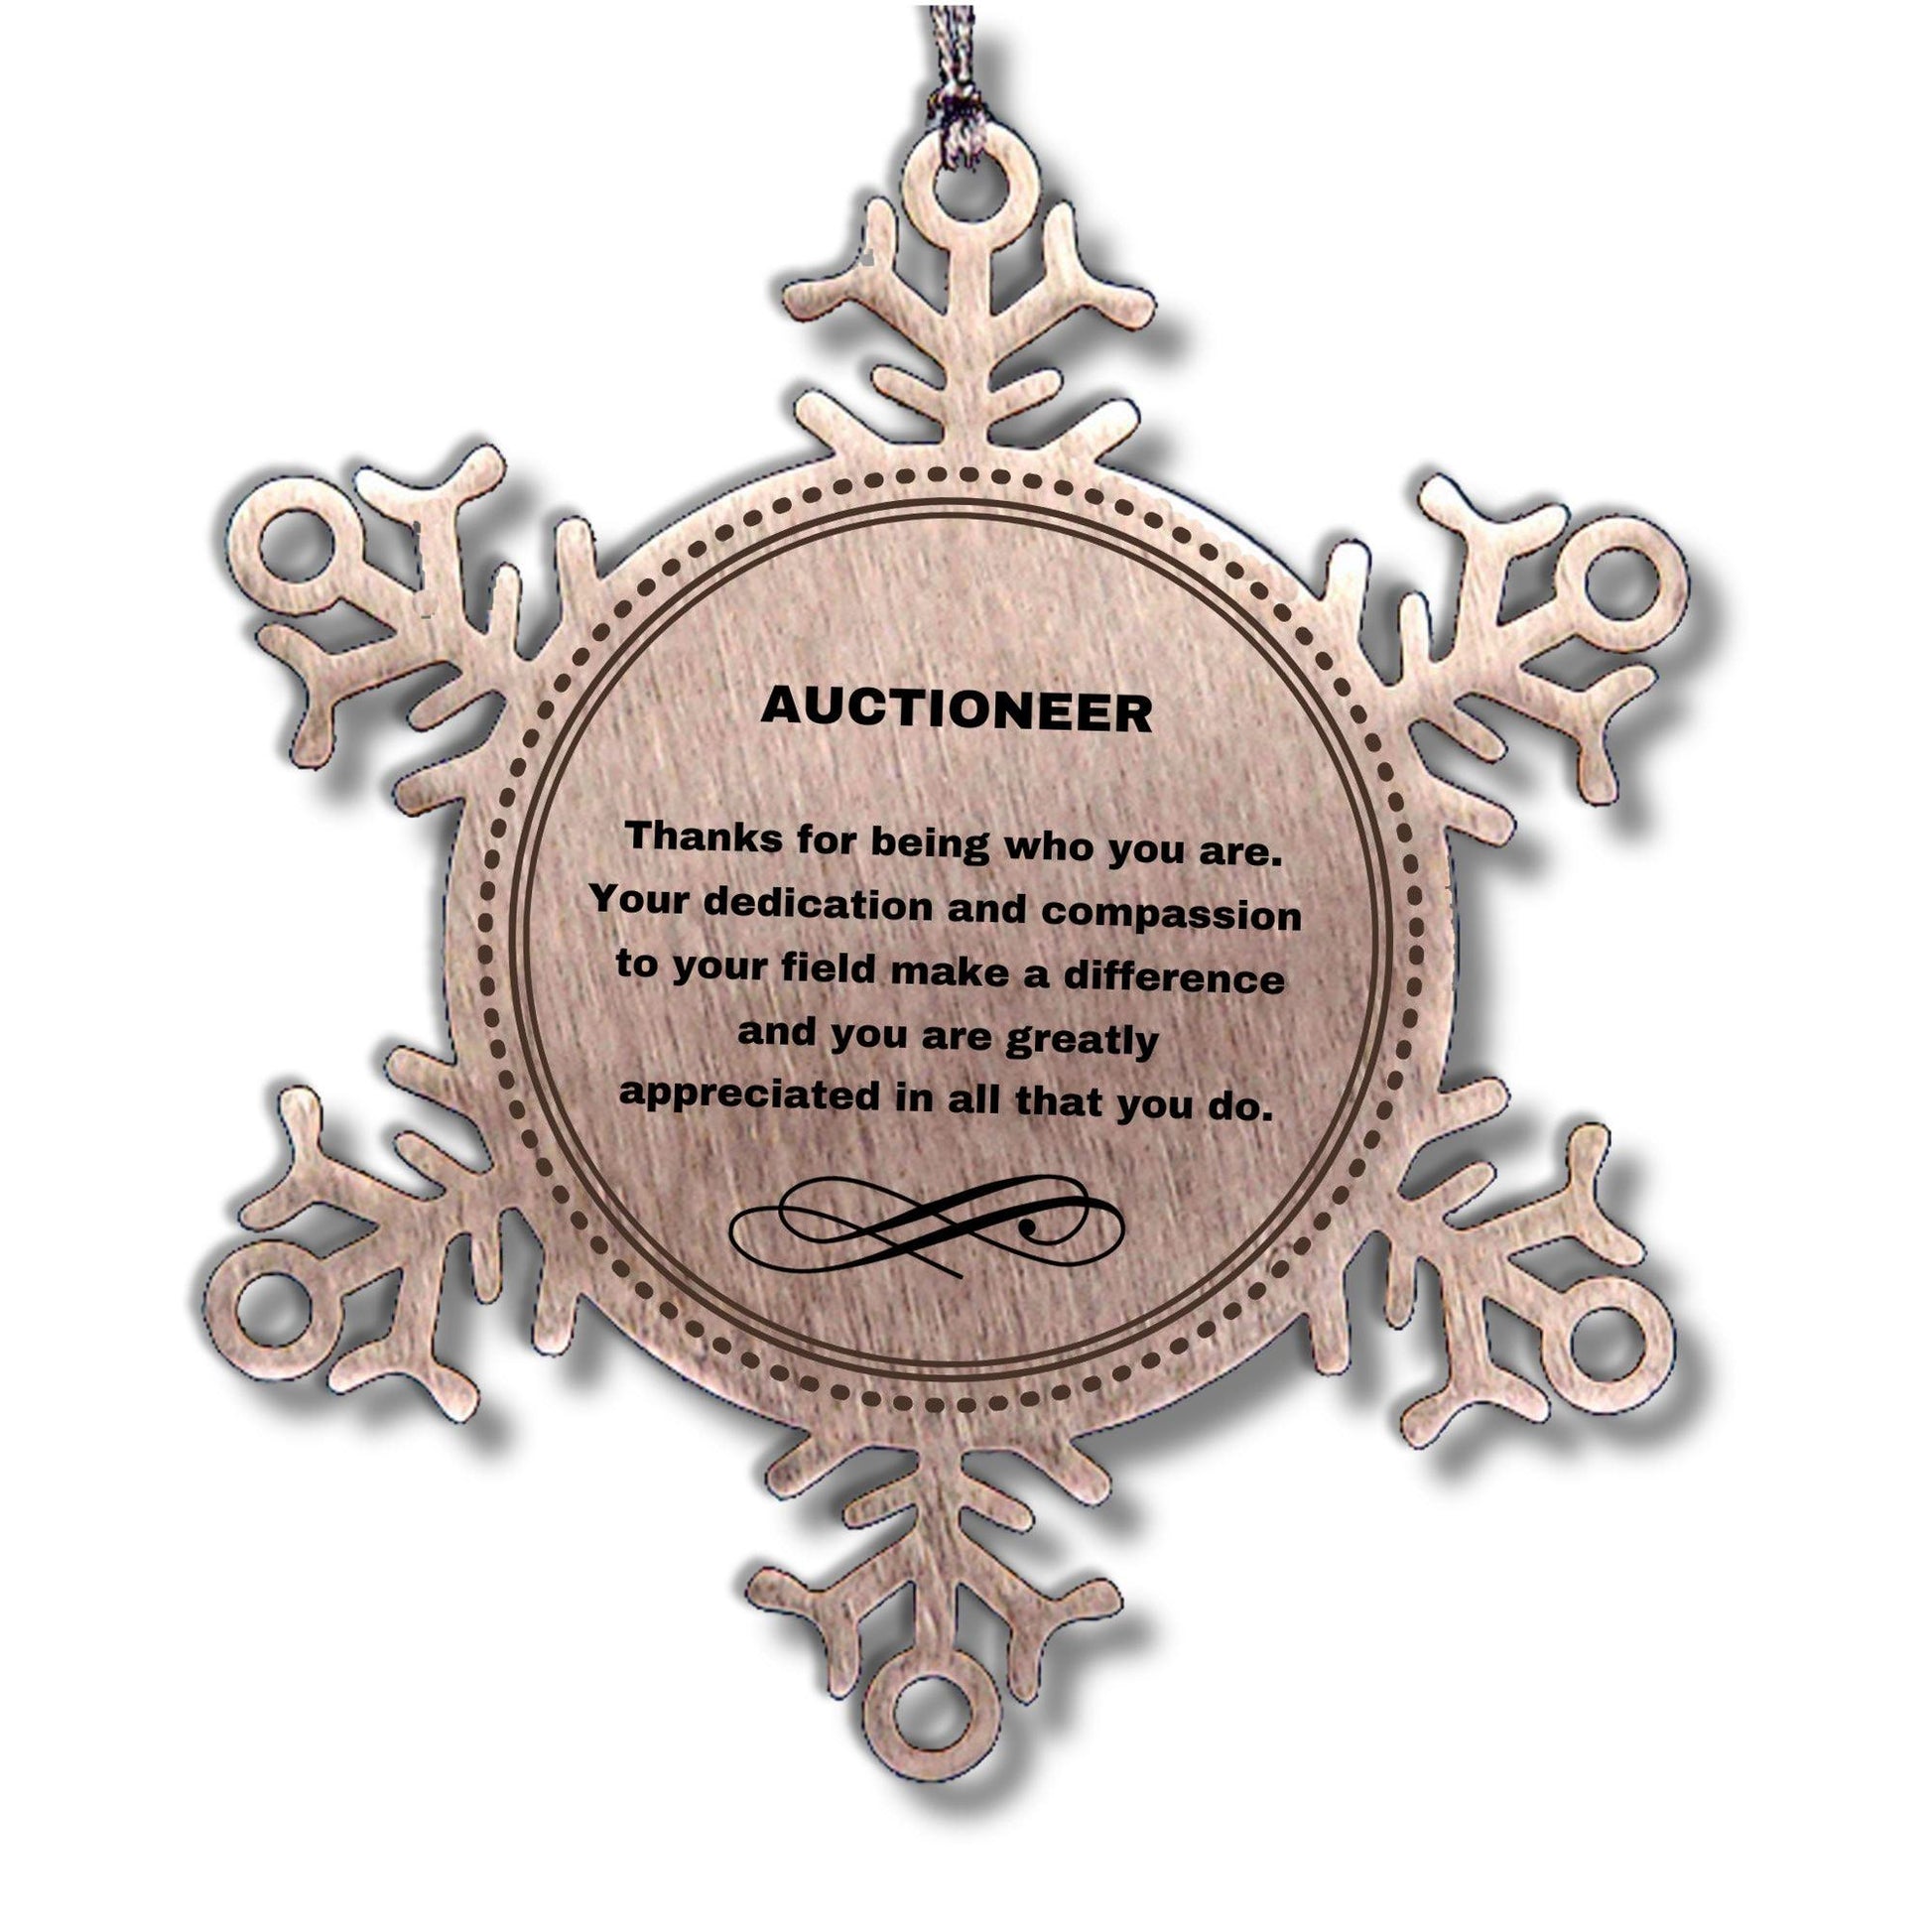 Auctioneer Snowflake Ornament - Thanks for being who you are - Birthday Christmas Tree Gifts Coworkers Colleague Boss - Mallard Moon Gift Shop